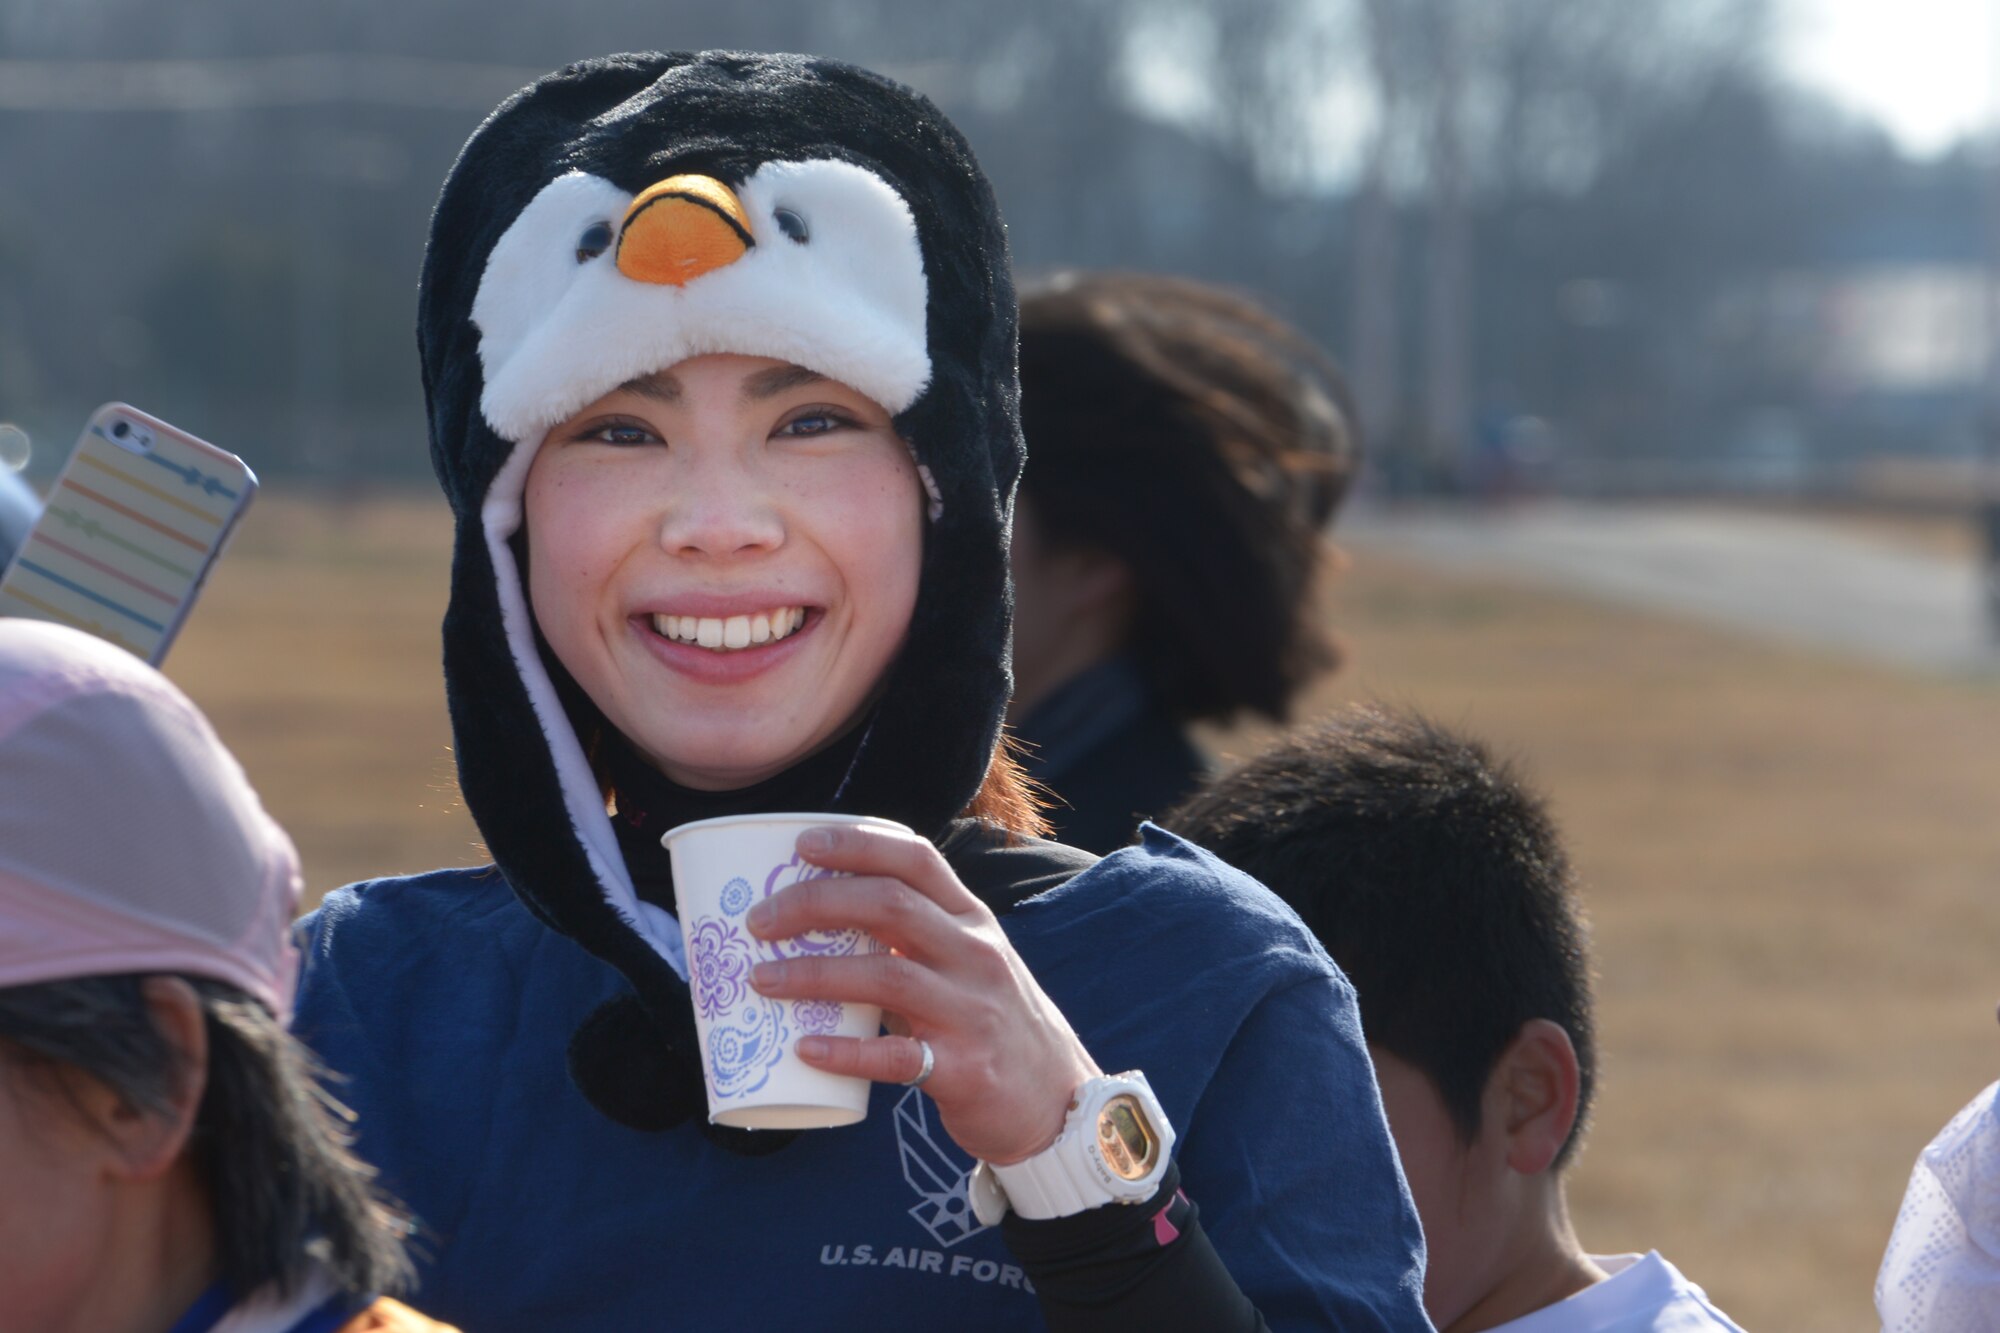 A participants takes a break to hydrate during the 35th Annual Frostbite Run at Yokota
Air Base, Japan, Jan. 17, 2016. The event offered multiple race options to participants
as well as a number of booths with U.S. foods and items. More than 9,000 people
participated in the annual event. (U.S. Air Force photo by Staff Sgt. Cody H. Ramirez/
Released)